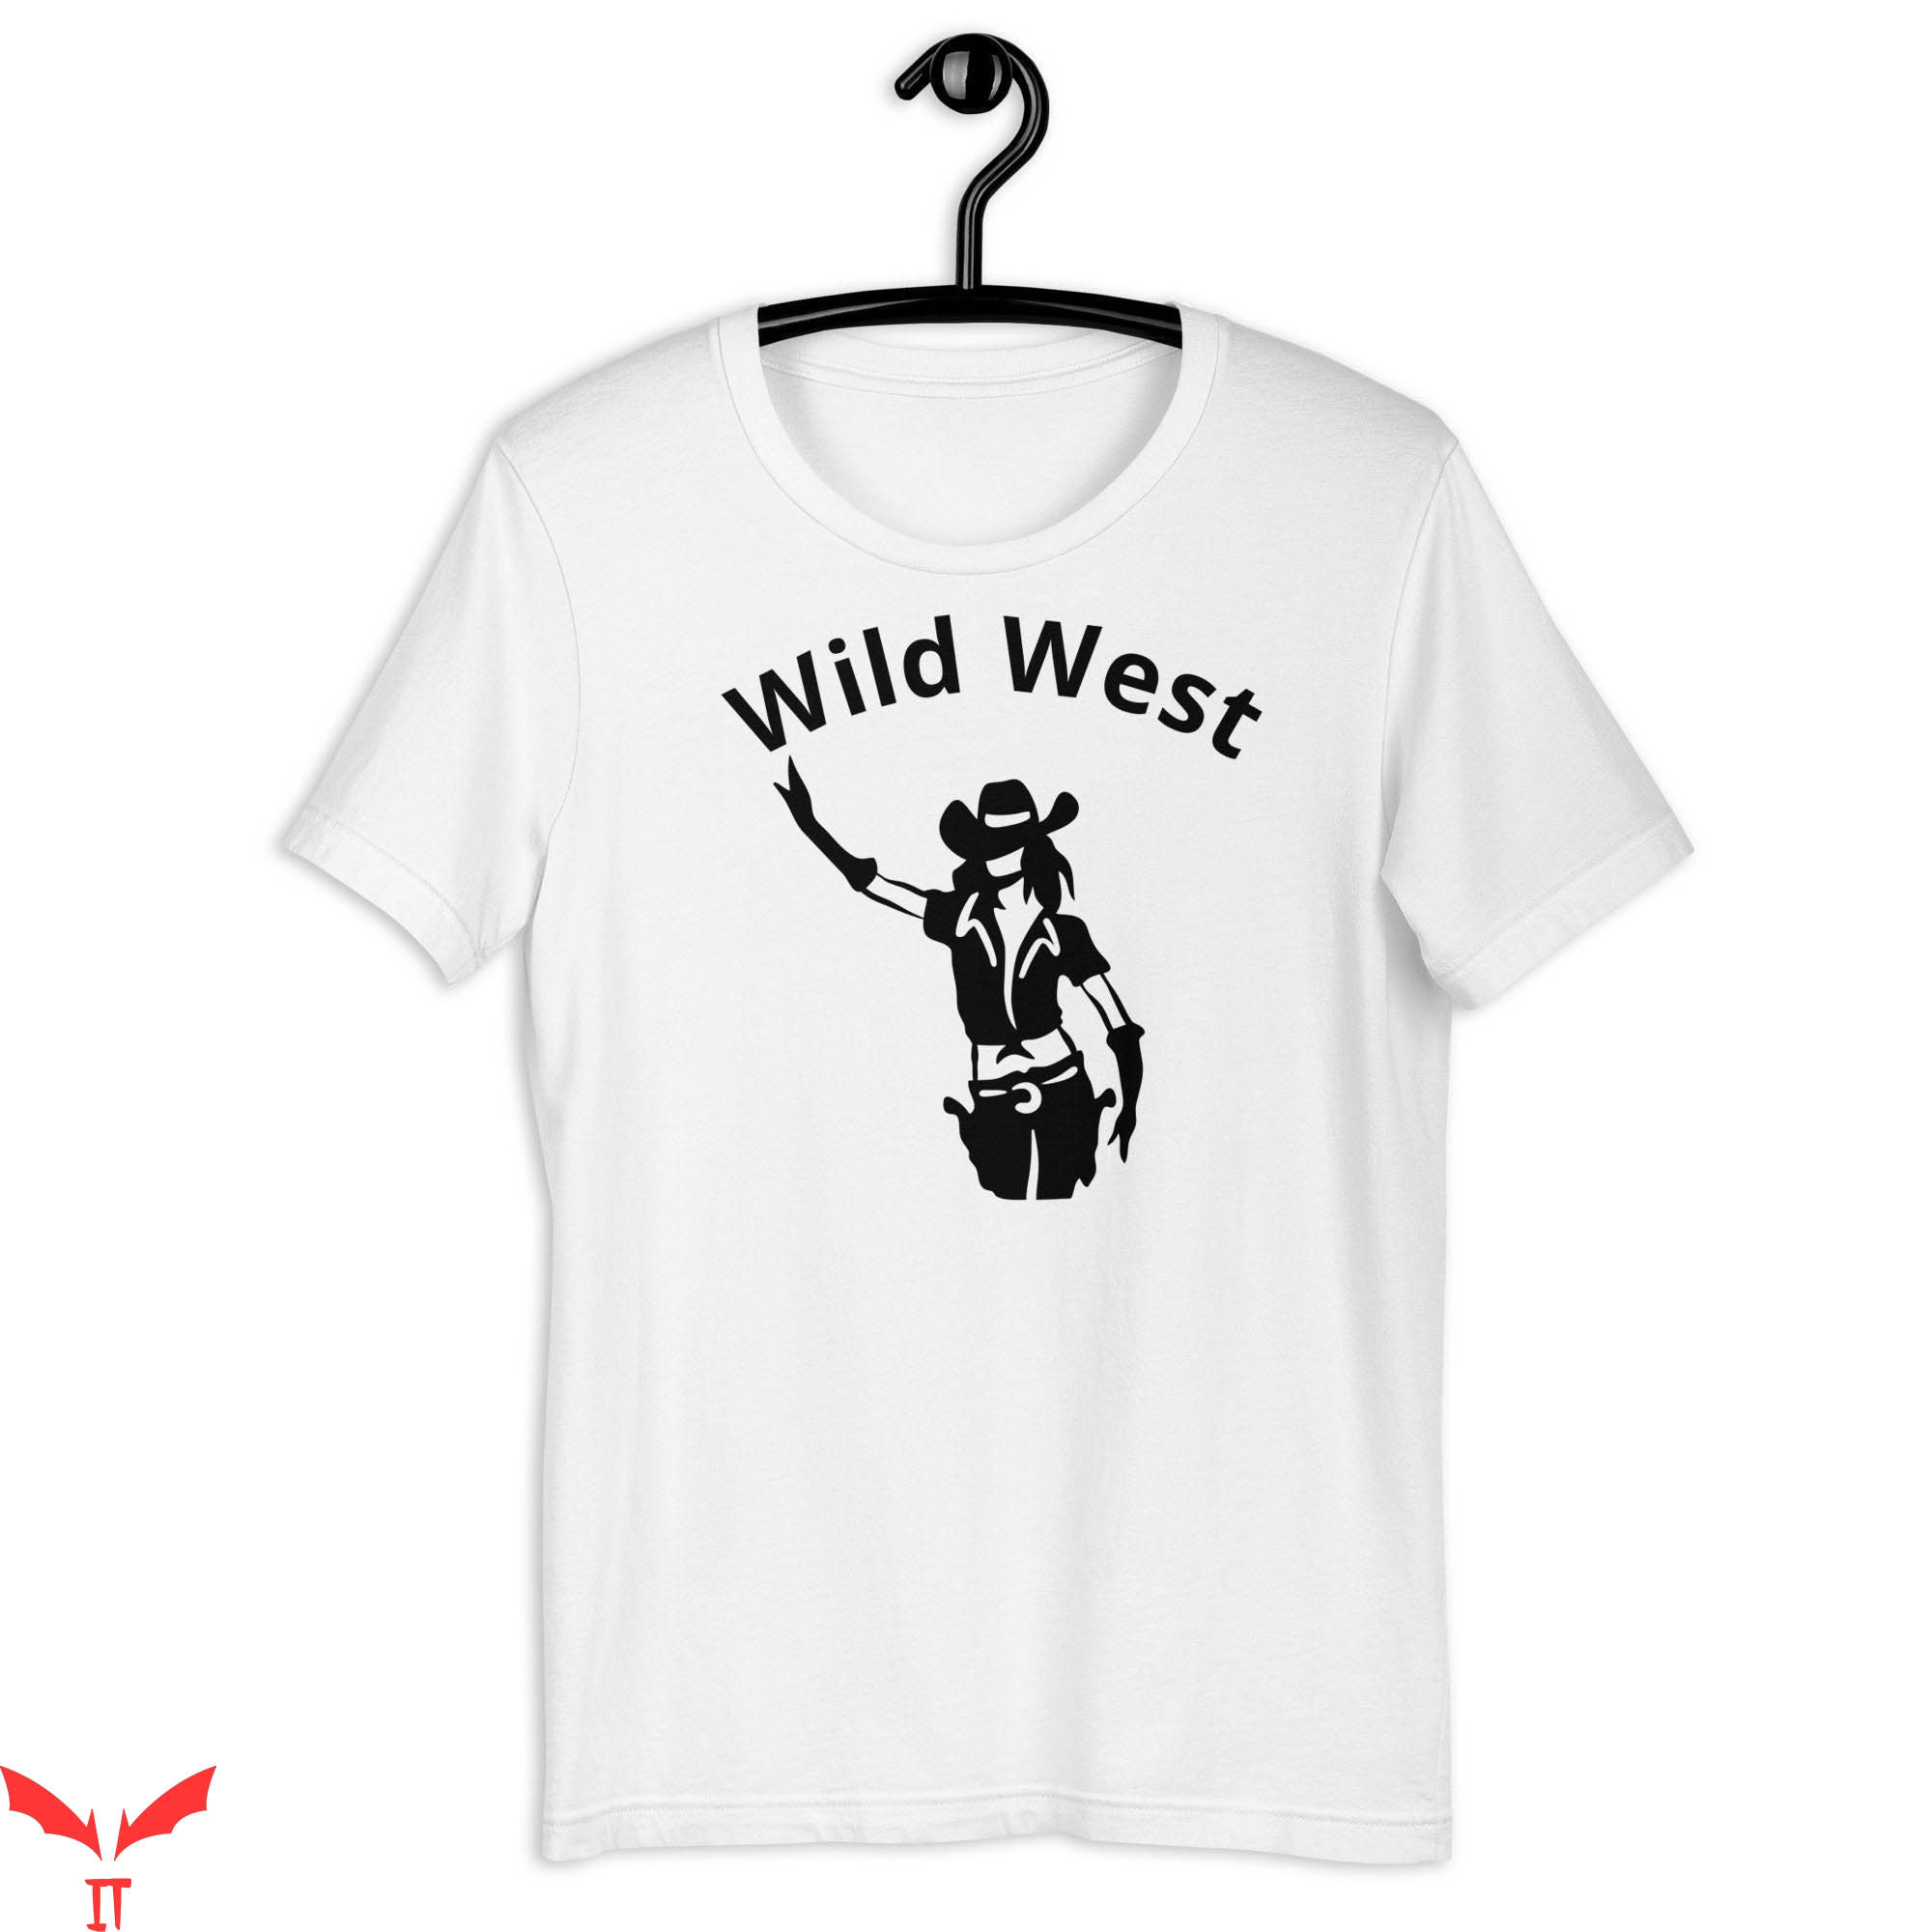 Wild West T-Shirt Vintage Retro Country Style Tee Shirt